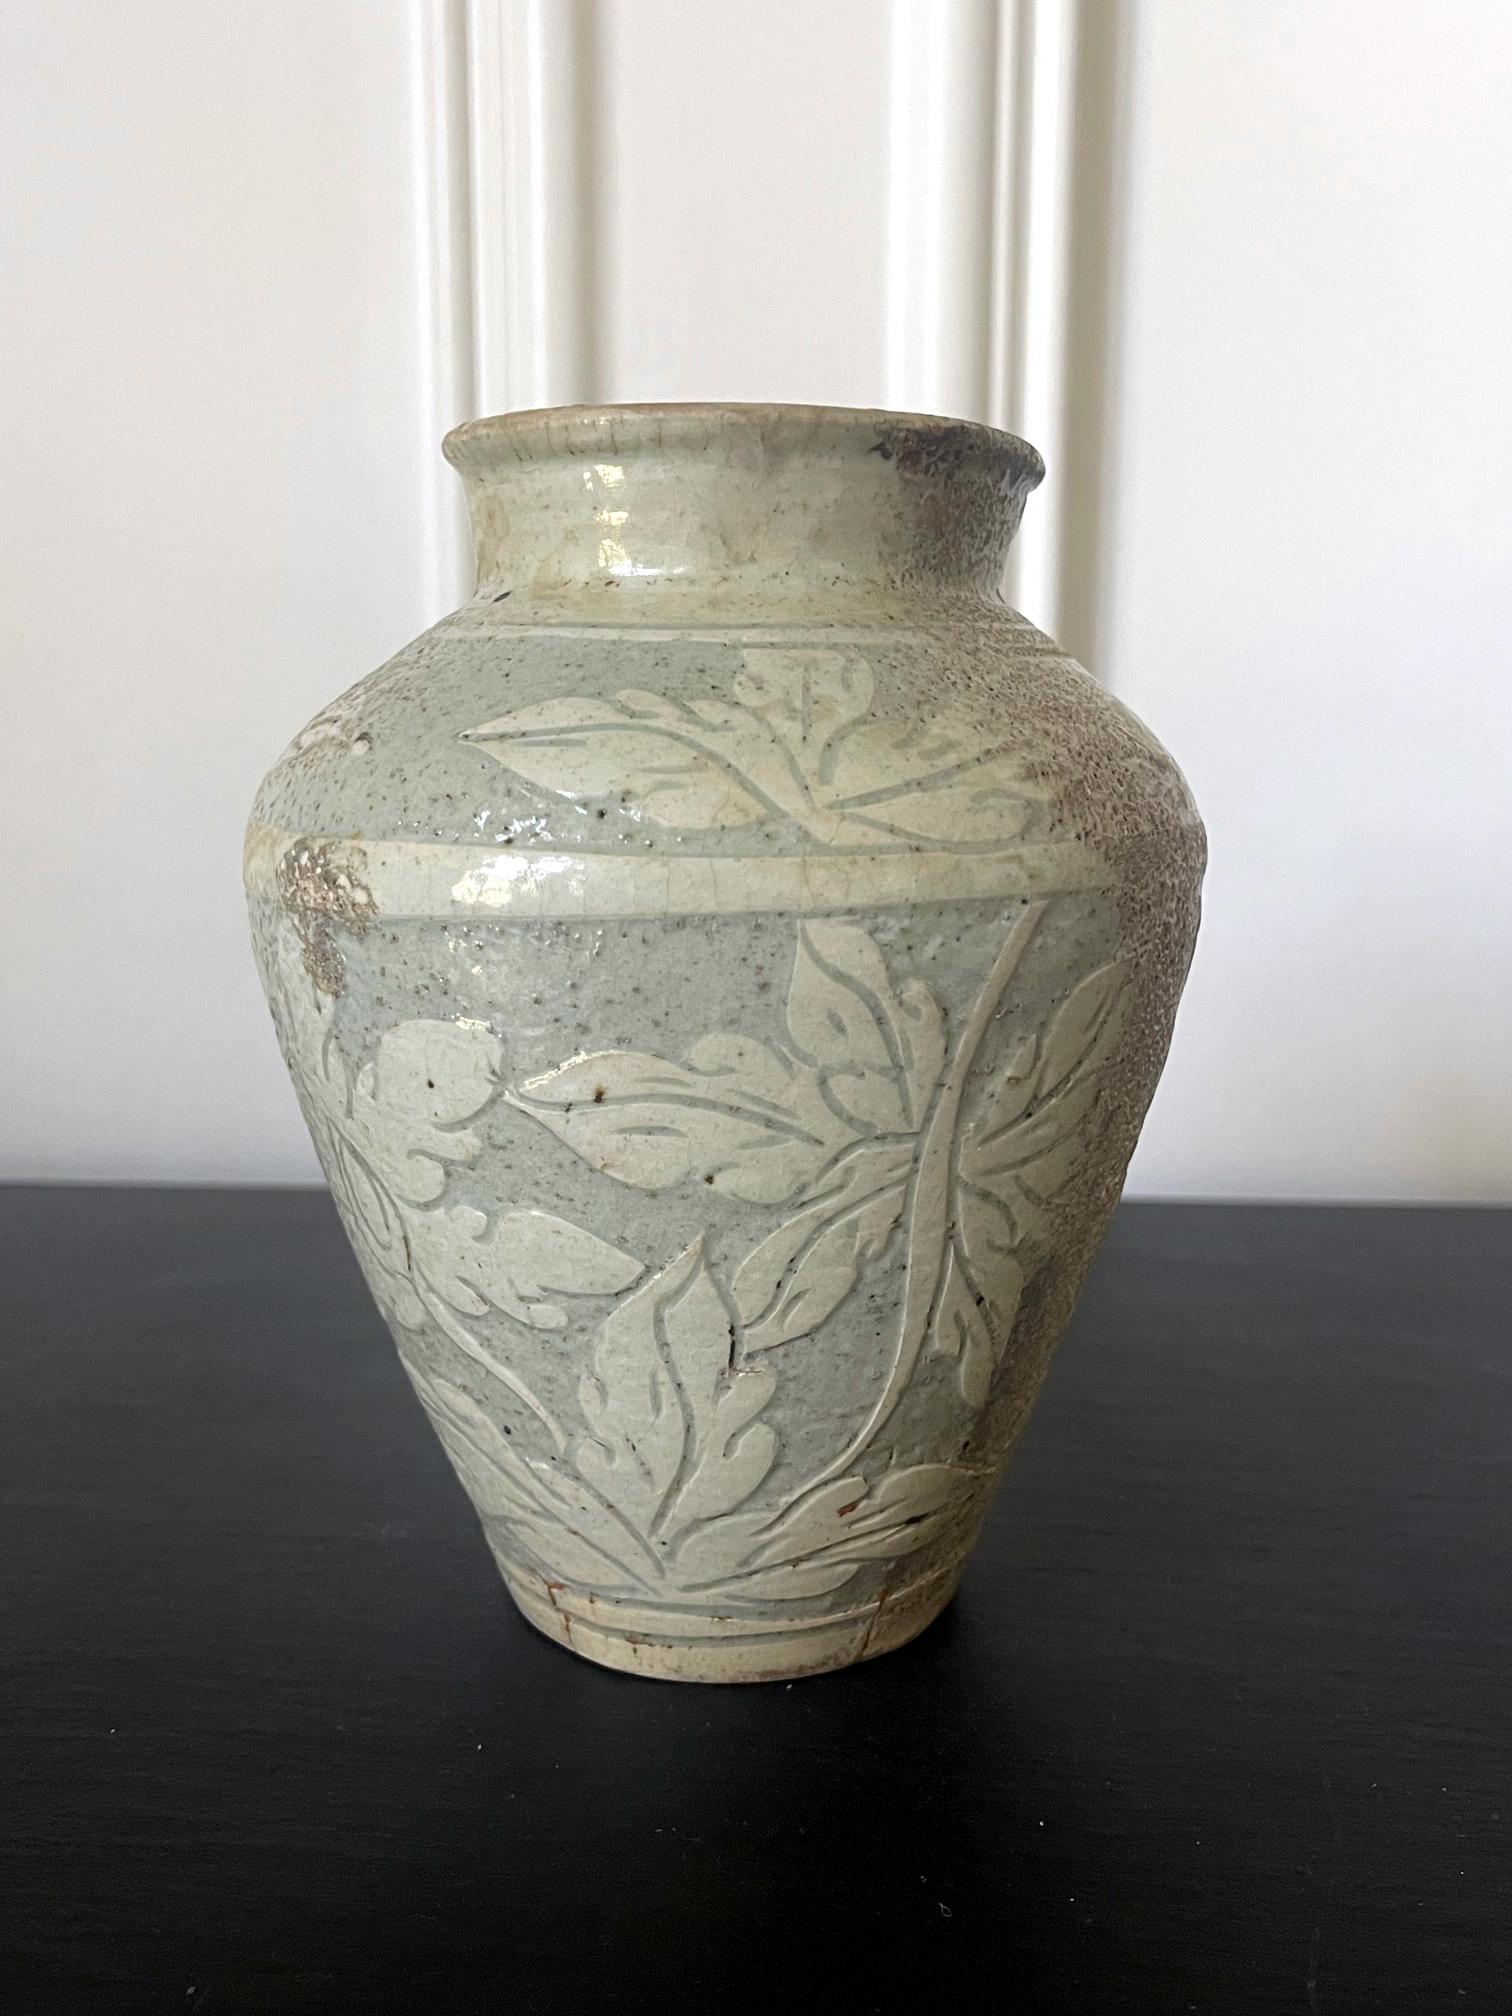 A Korean ceramic bottle form jar of Buncheong ware circa 15-16th century Joseon Dynasty. The surface of the jar features a celadon glaze and an elaborate incised design of large floral and leaves, possibly representing peony. Particularly, one side